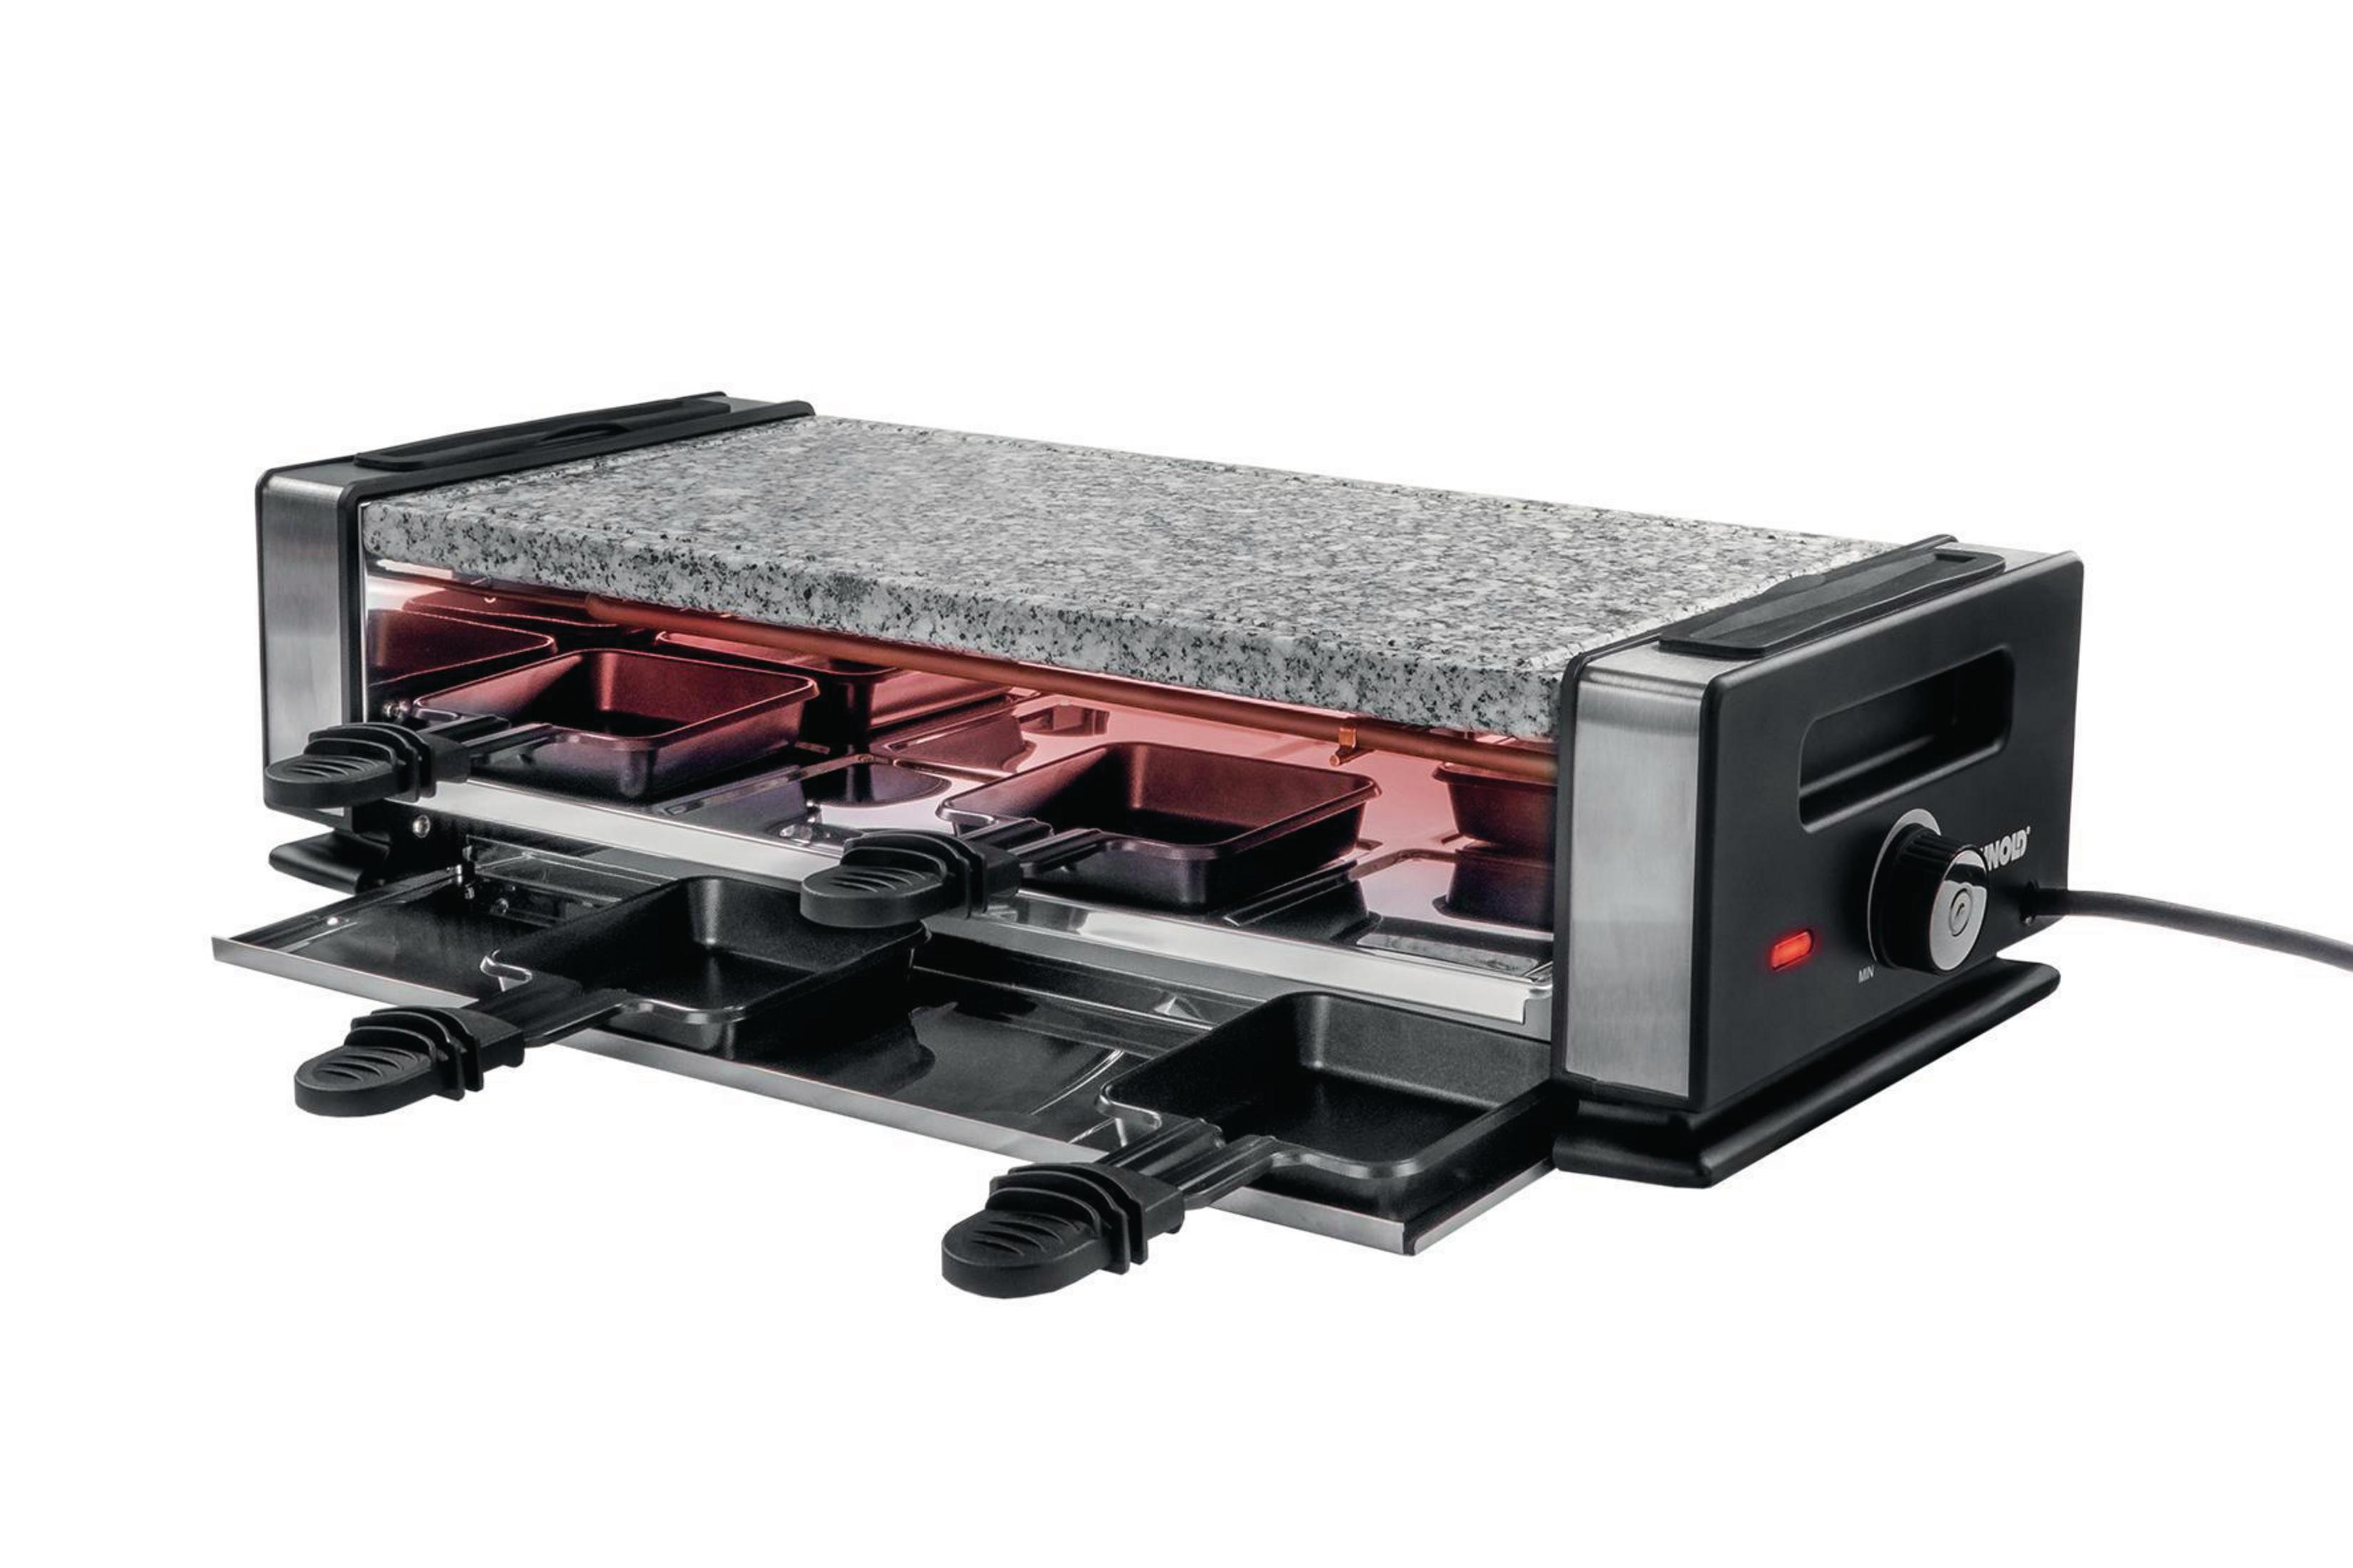 UNOLD 48760 DELICE BASIC Raclette